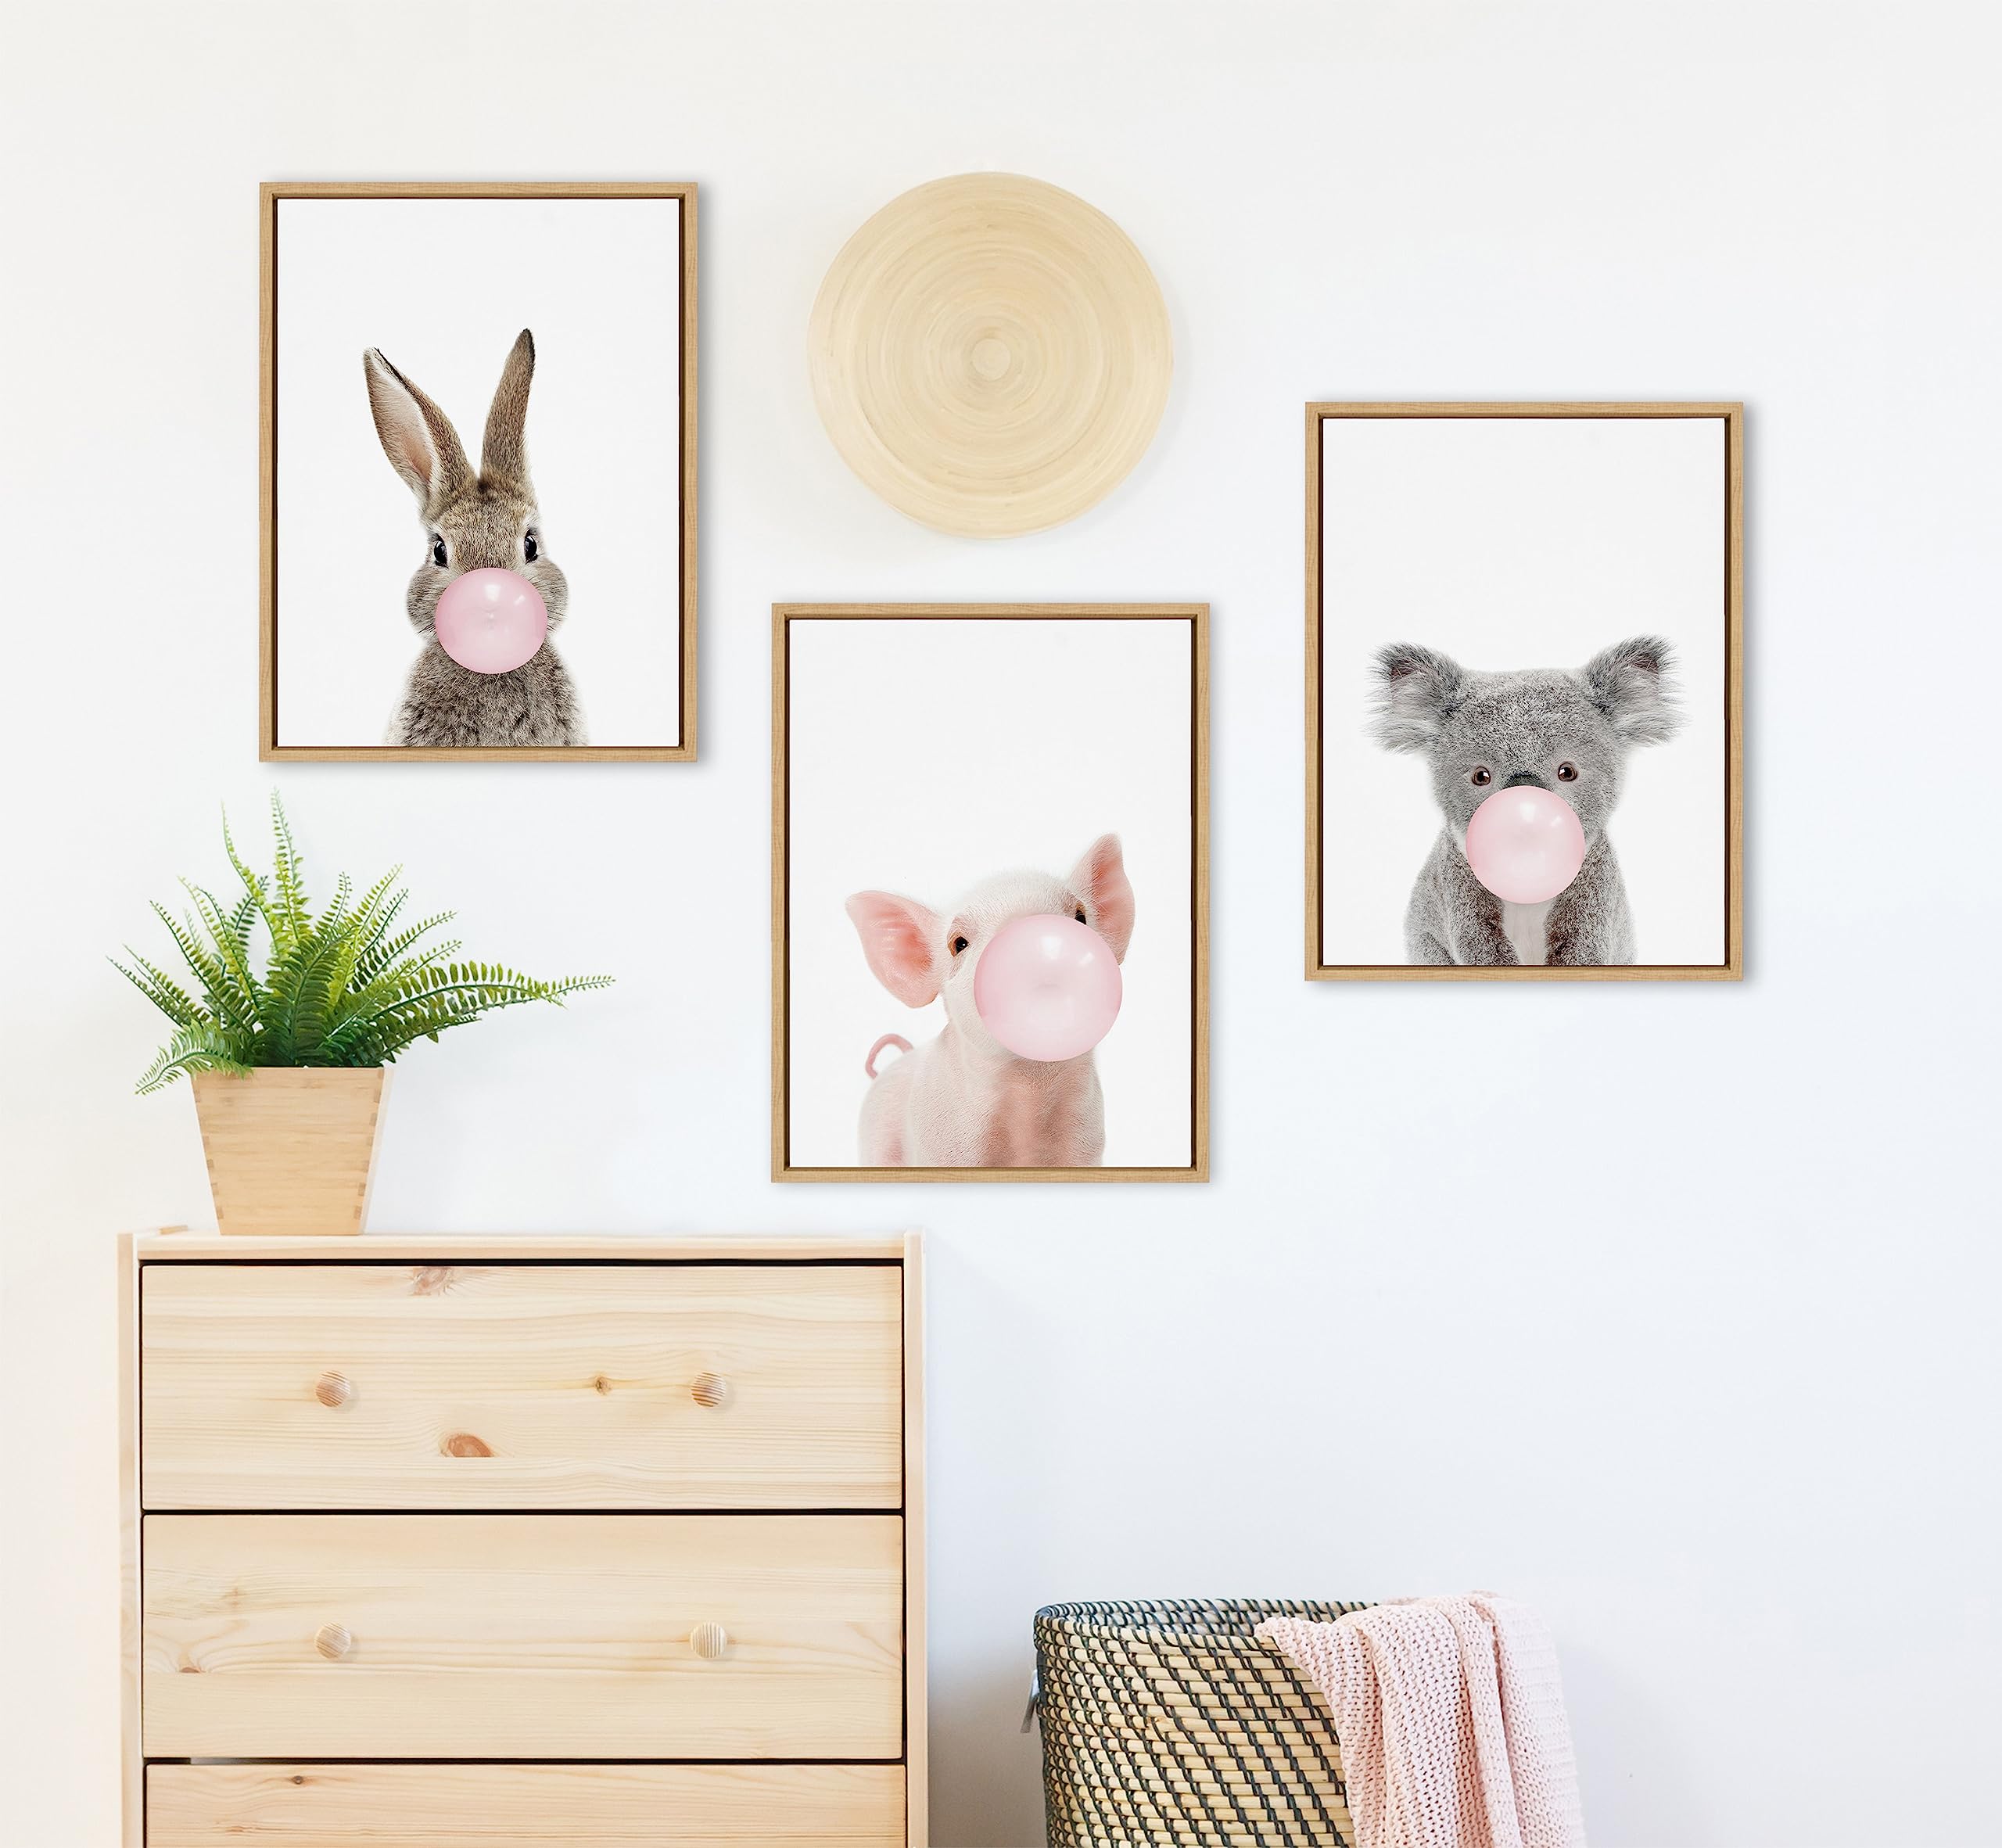 Kate and Laurel Sylvie Bubble Gum Bunny Framed Canvas Wall Art by Amy Peterson Art Studio, 18x24 Natural, Cute Whimsical Animal Art for Wall